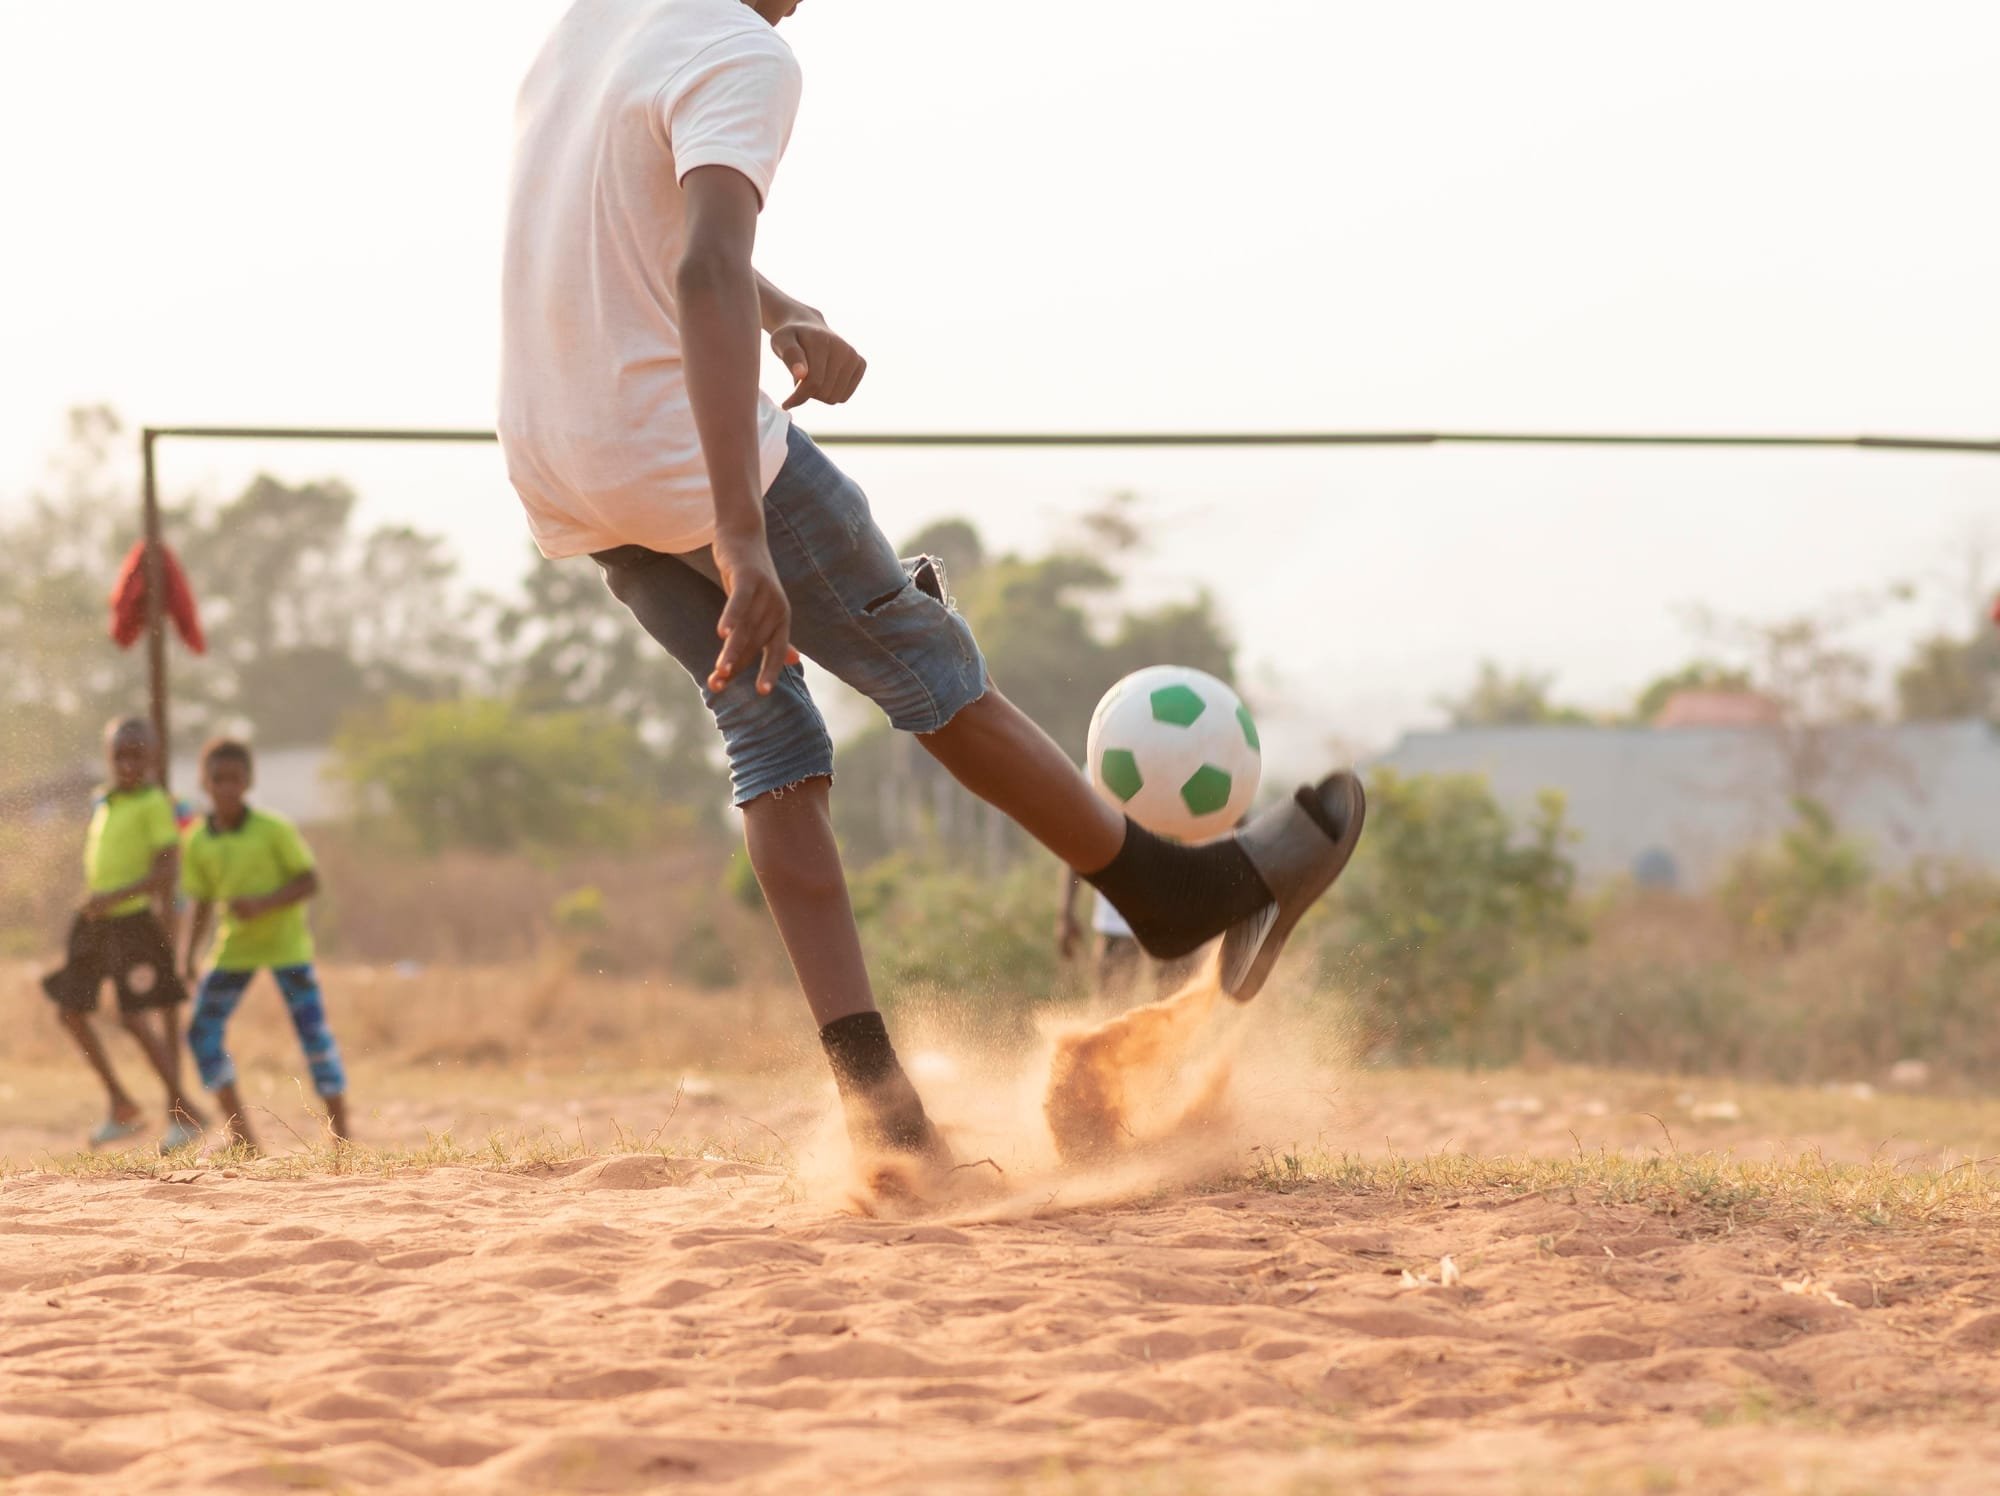 JOSEPH KENNEDY FOUNDATION LAUNCHES SOCCER TOURNAMENT TO UNEARTH TALENT IN MWATATE WARD